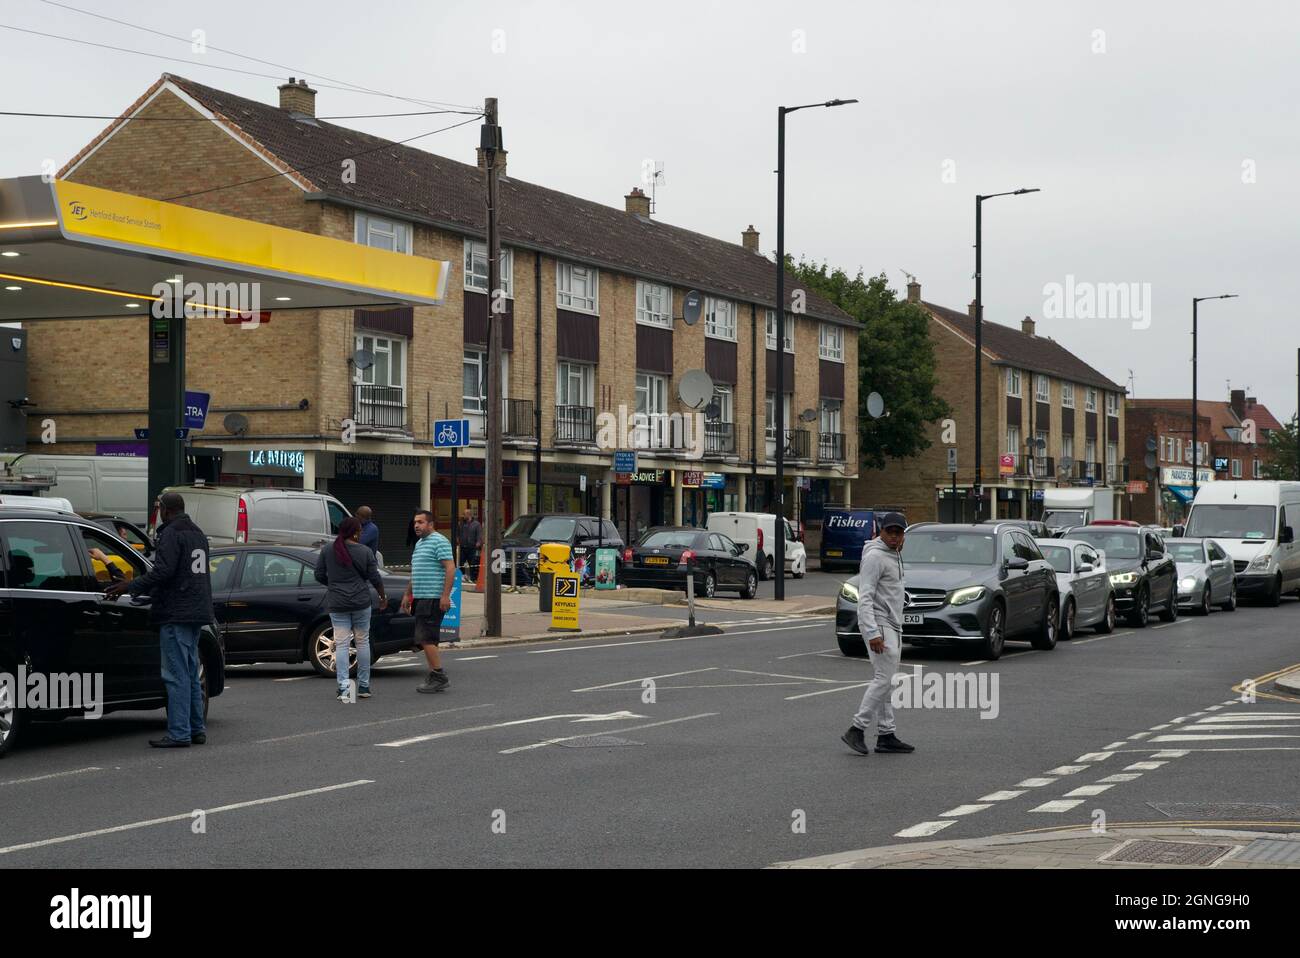 Enfield, UK. 25th September 2021. Long queues forming outside a petrol station in Enfield. Some people had got out of cars to try direct traffic. One petrol had closed in area. Andrew Steven Graham/Alamy Live News Stock Photo